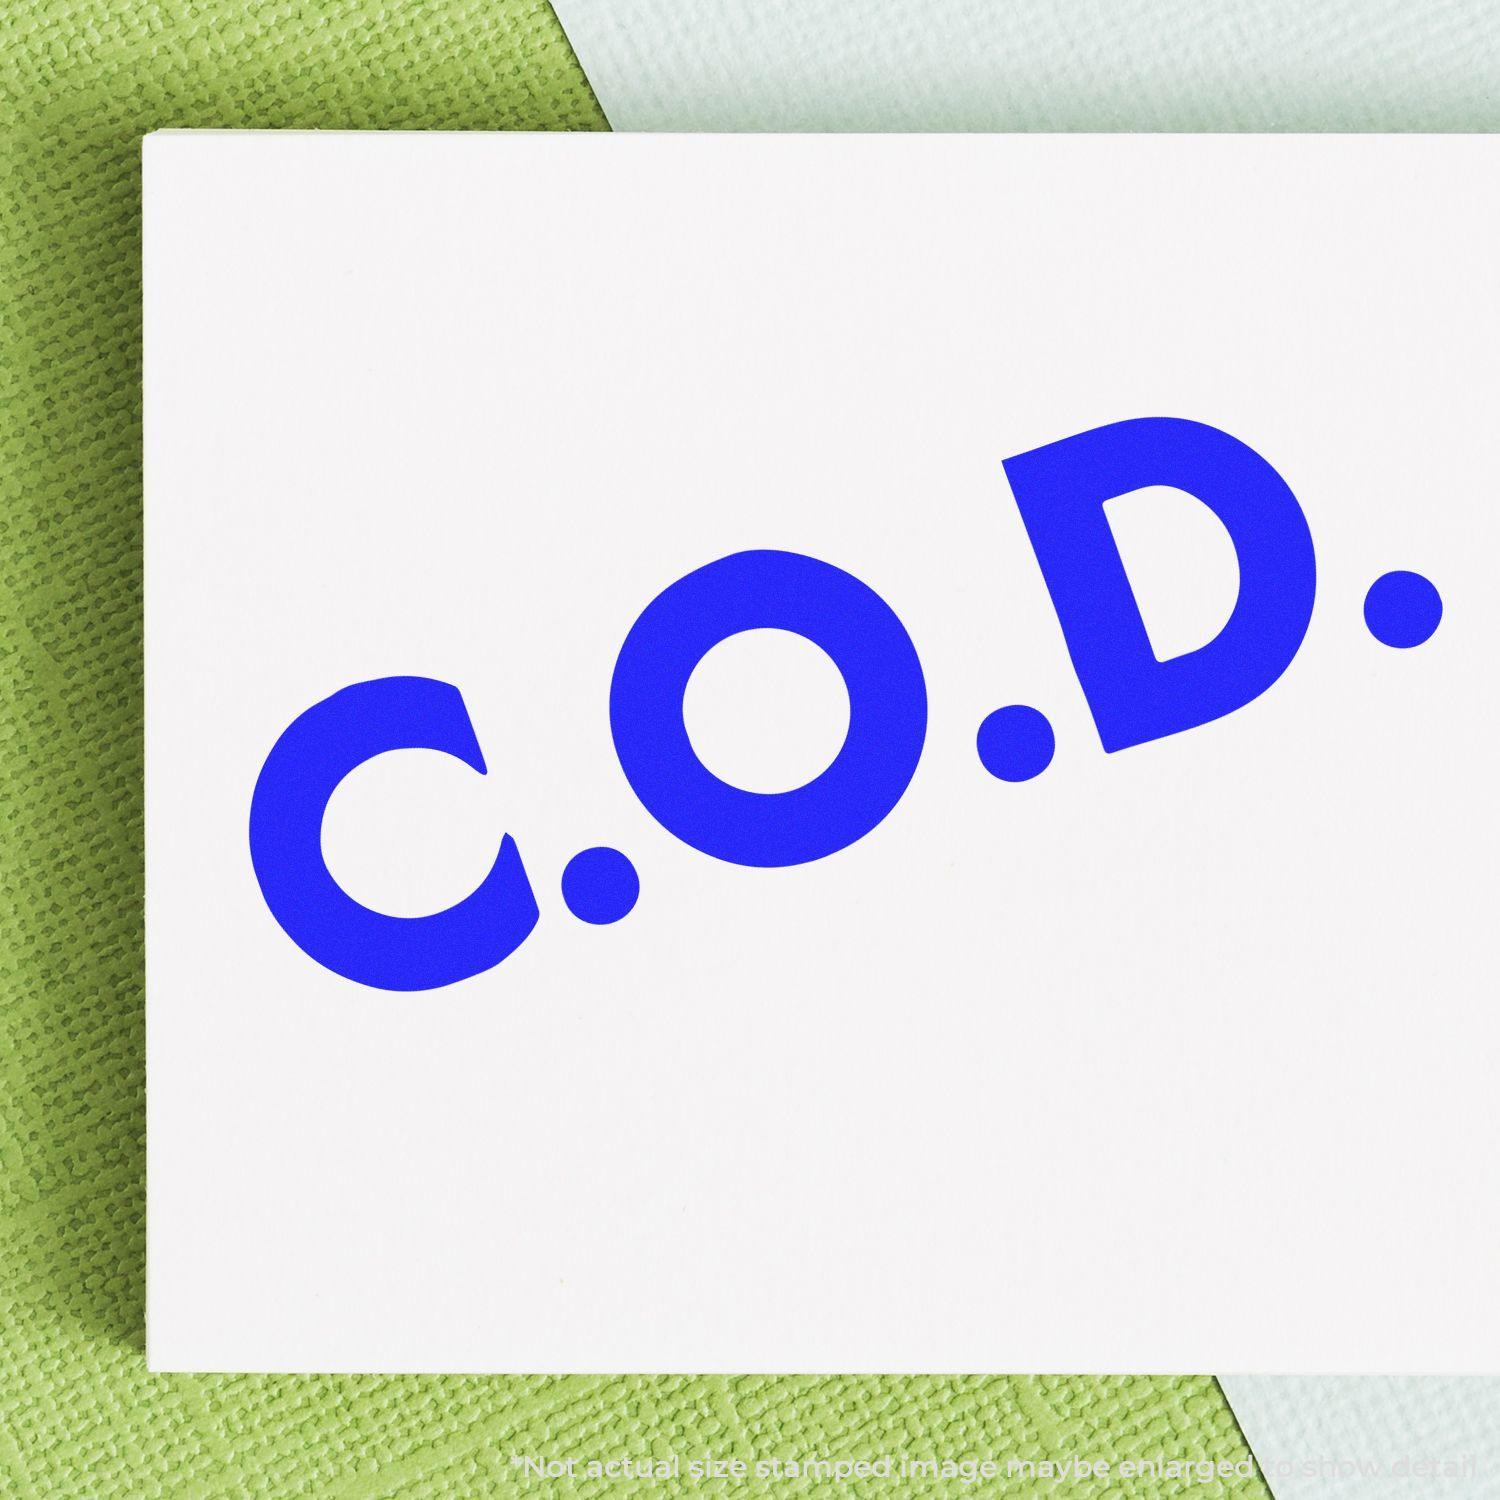 A stock office pre-inked stamp with a stamped image showing how the text "C.O.D." in bold font is displayed after stamping.